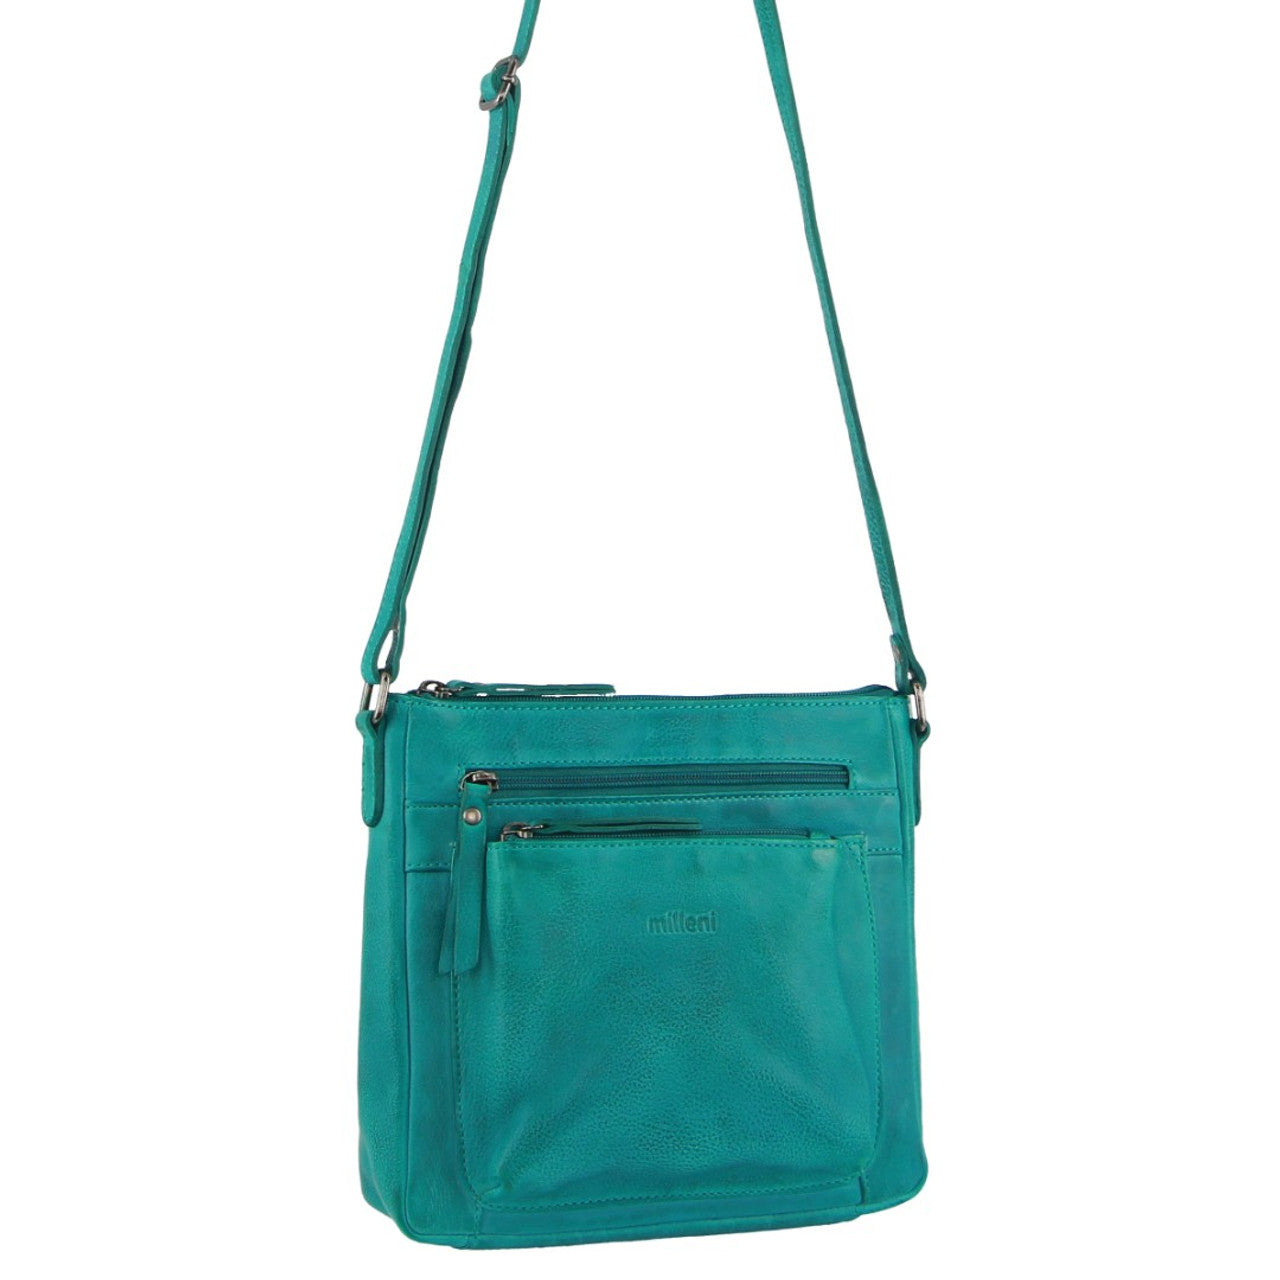 Milleni - NL2598 Leather cross body bag - Turquoise-1